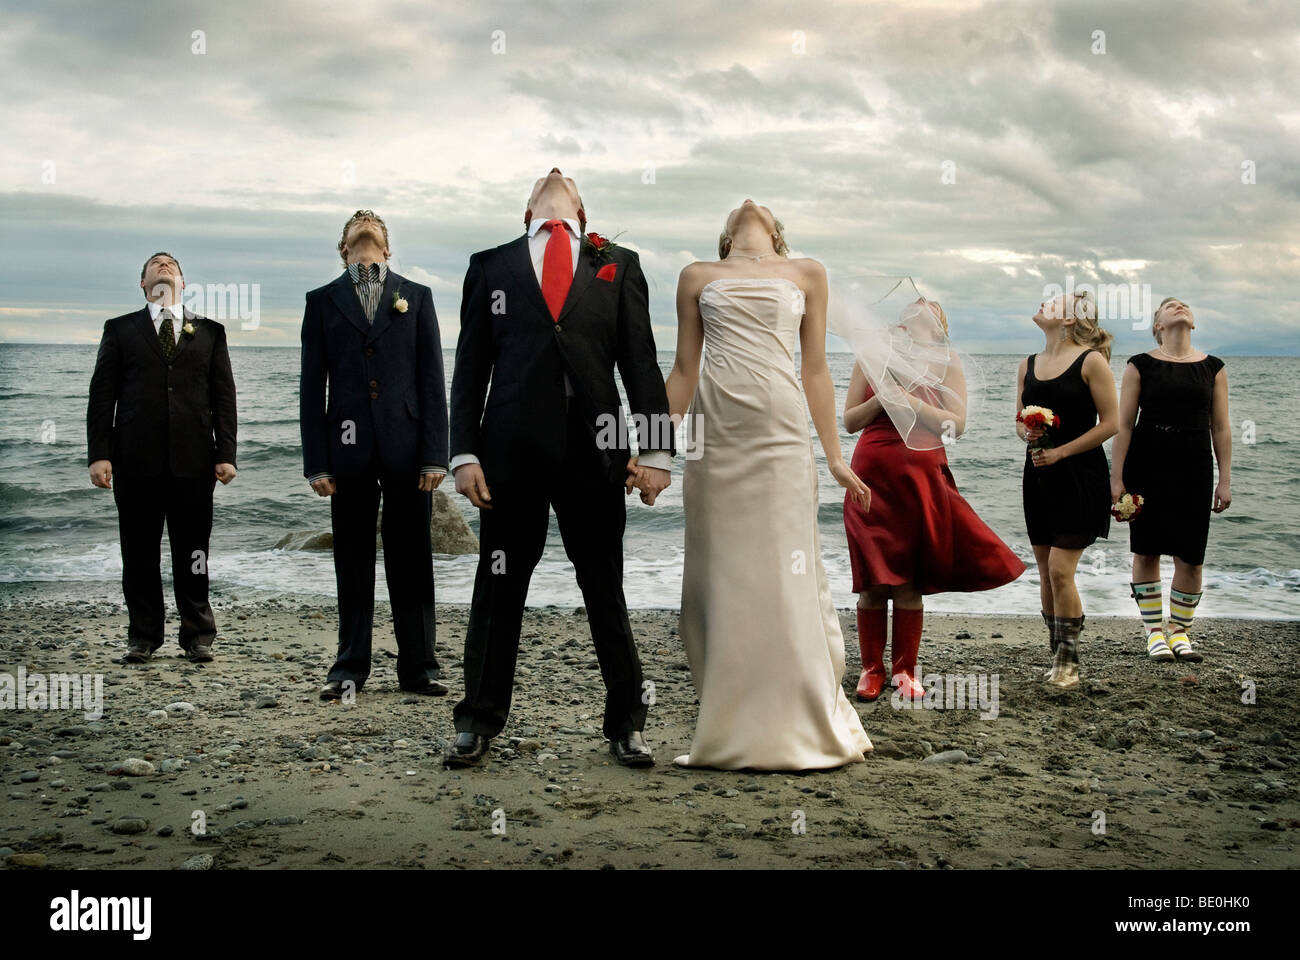 Wedding party on beach under threatening storm clouds Stock Photo